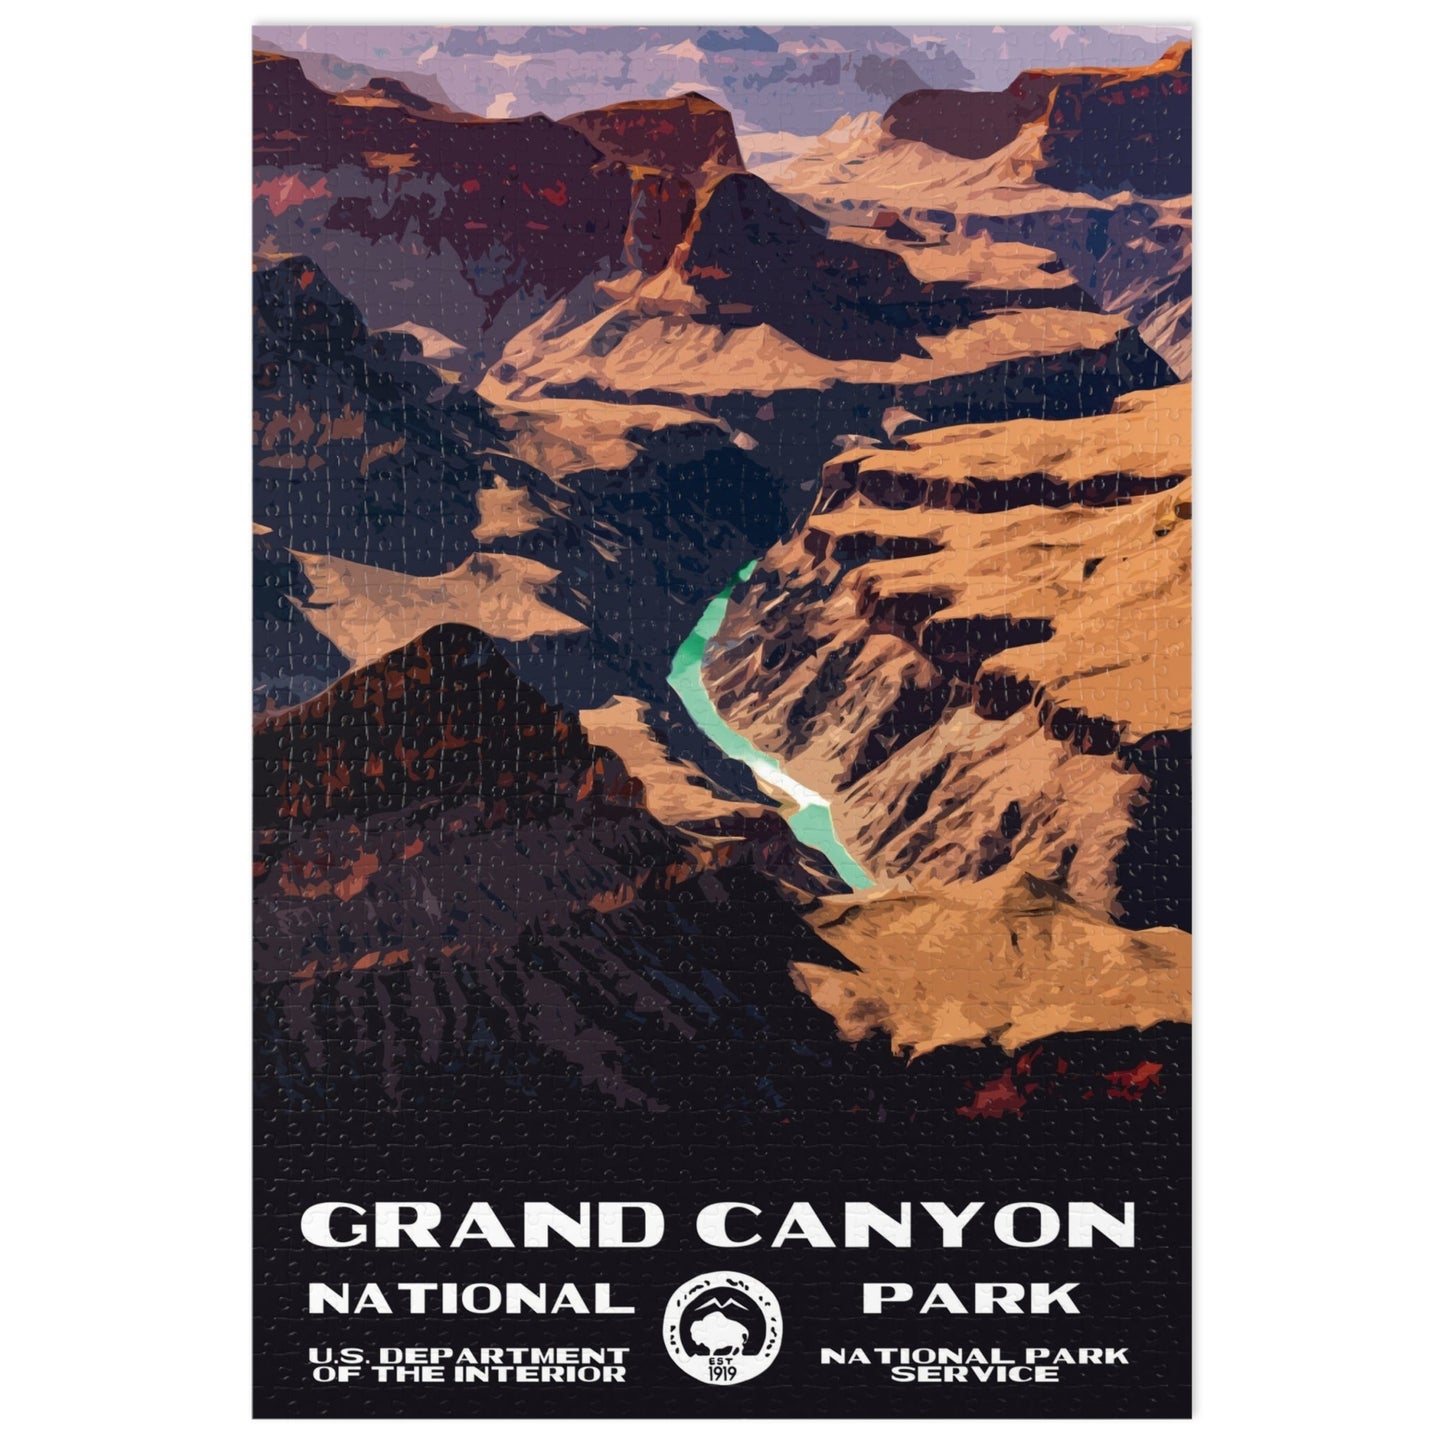 Grand Canyon National Park Jigsaw Puzzle - 1000 Pieces